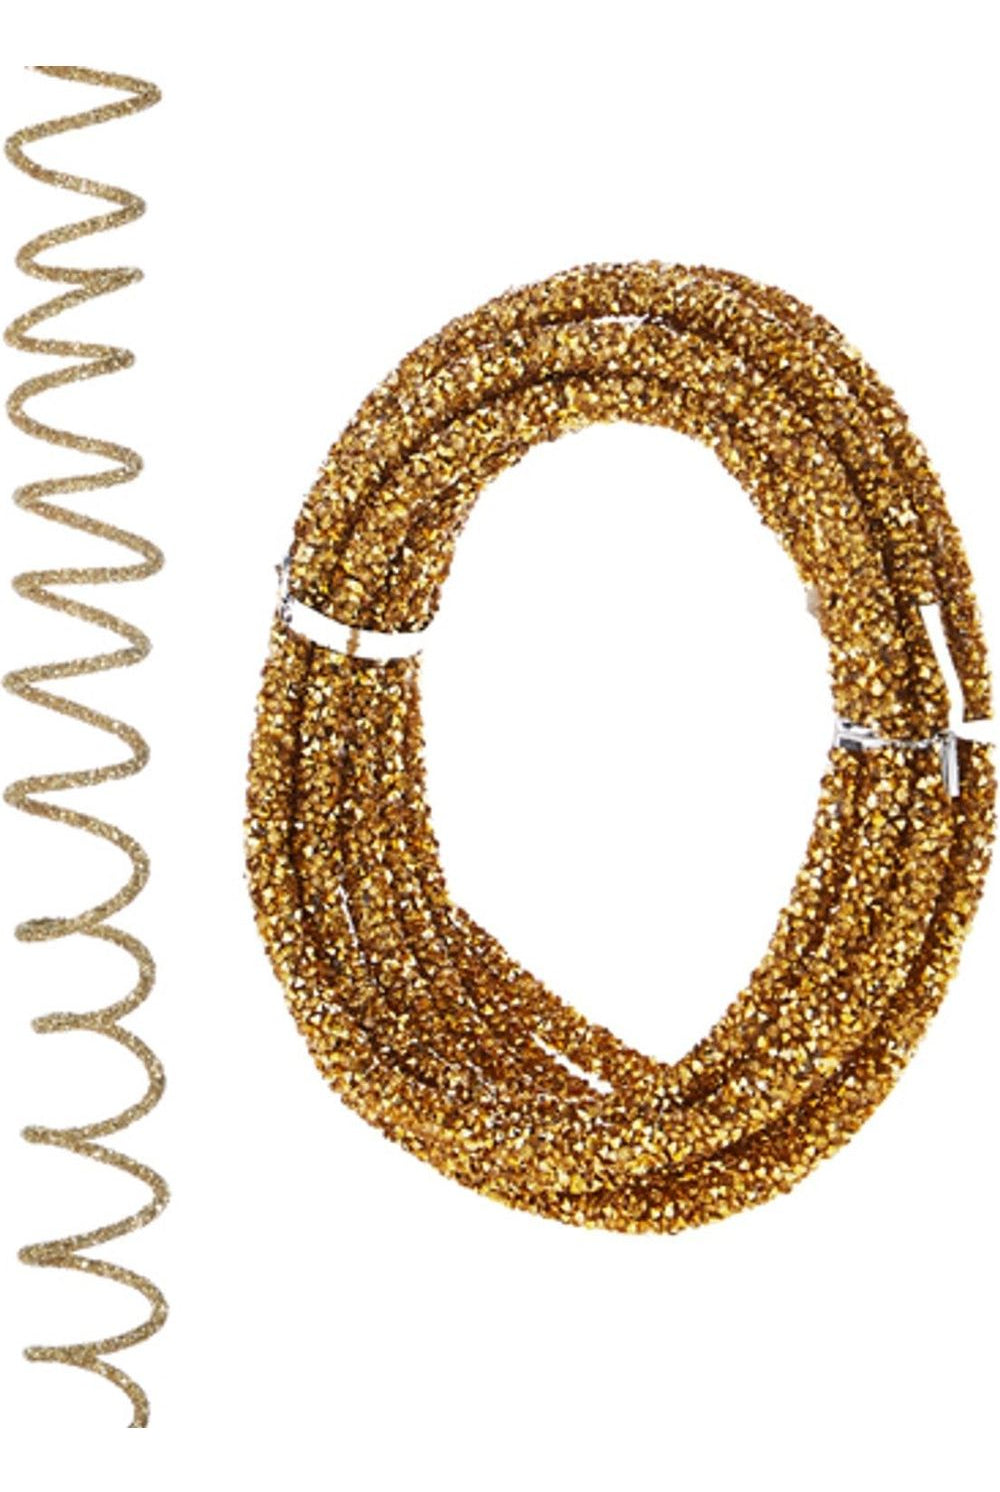 10' Gold Glittered Rope Garland - Michelle's aDOORable Creations - Garland